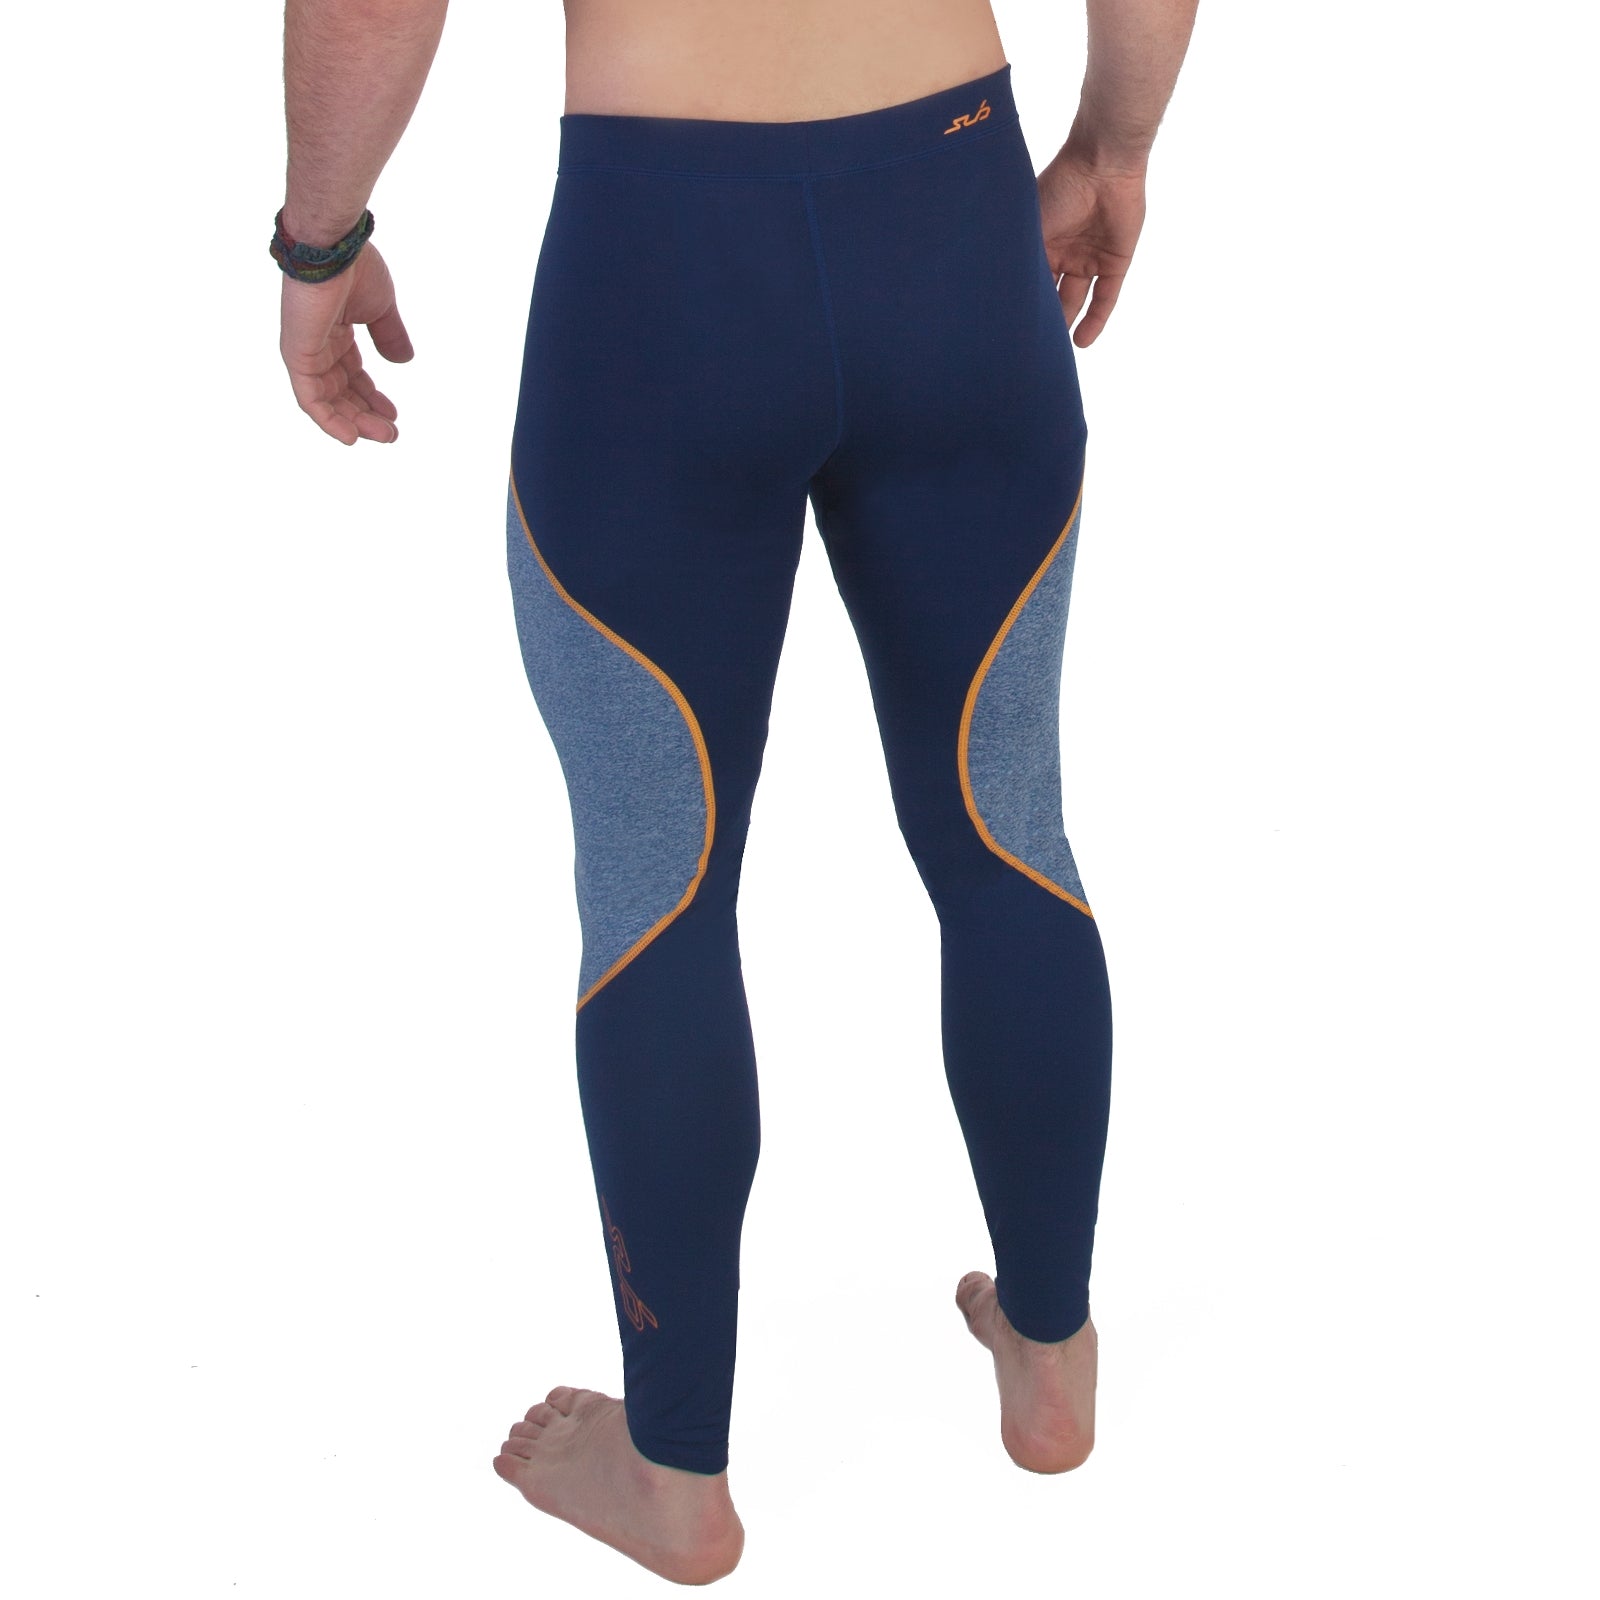 Bracelayer® Thermal Ski Compression Pants with Knee Support